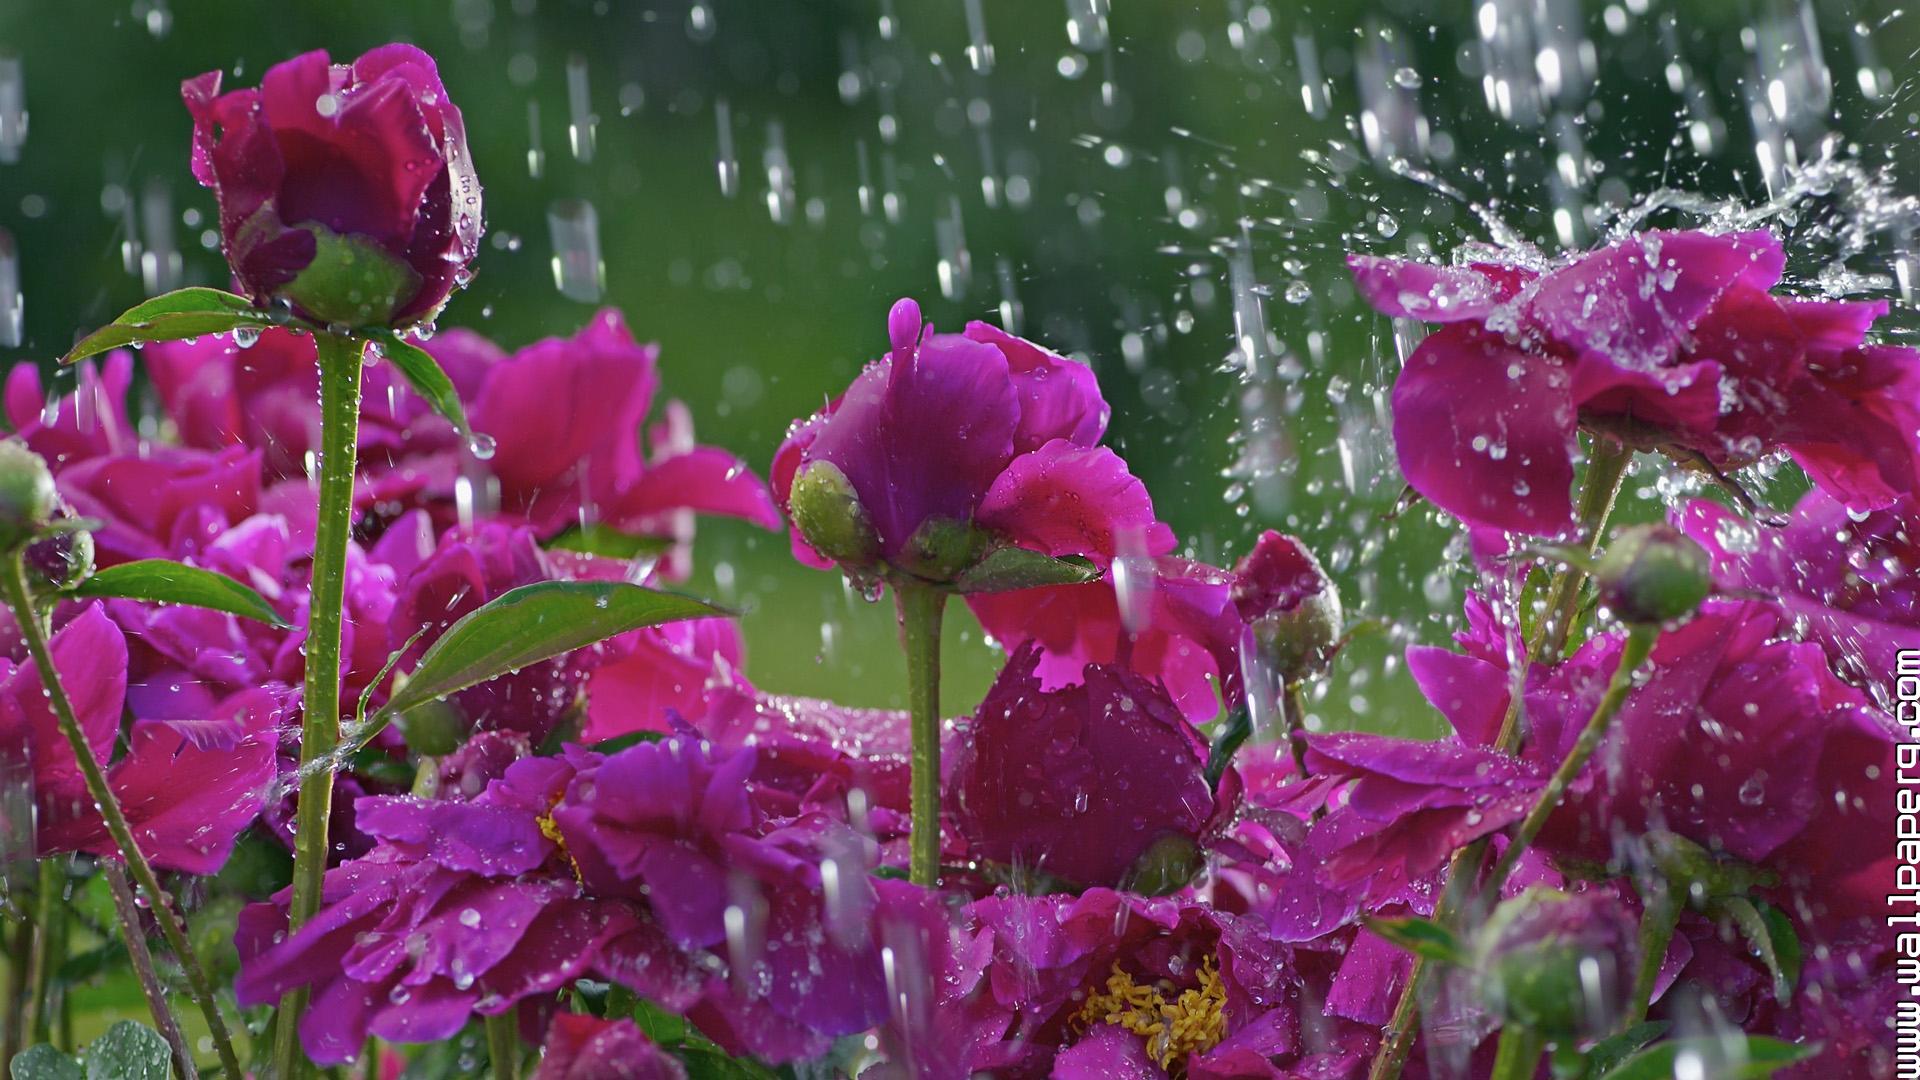 Download Beautiful blossoms in rain - Hd monsoon images- For Mobile Phone